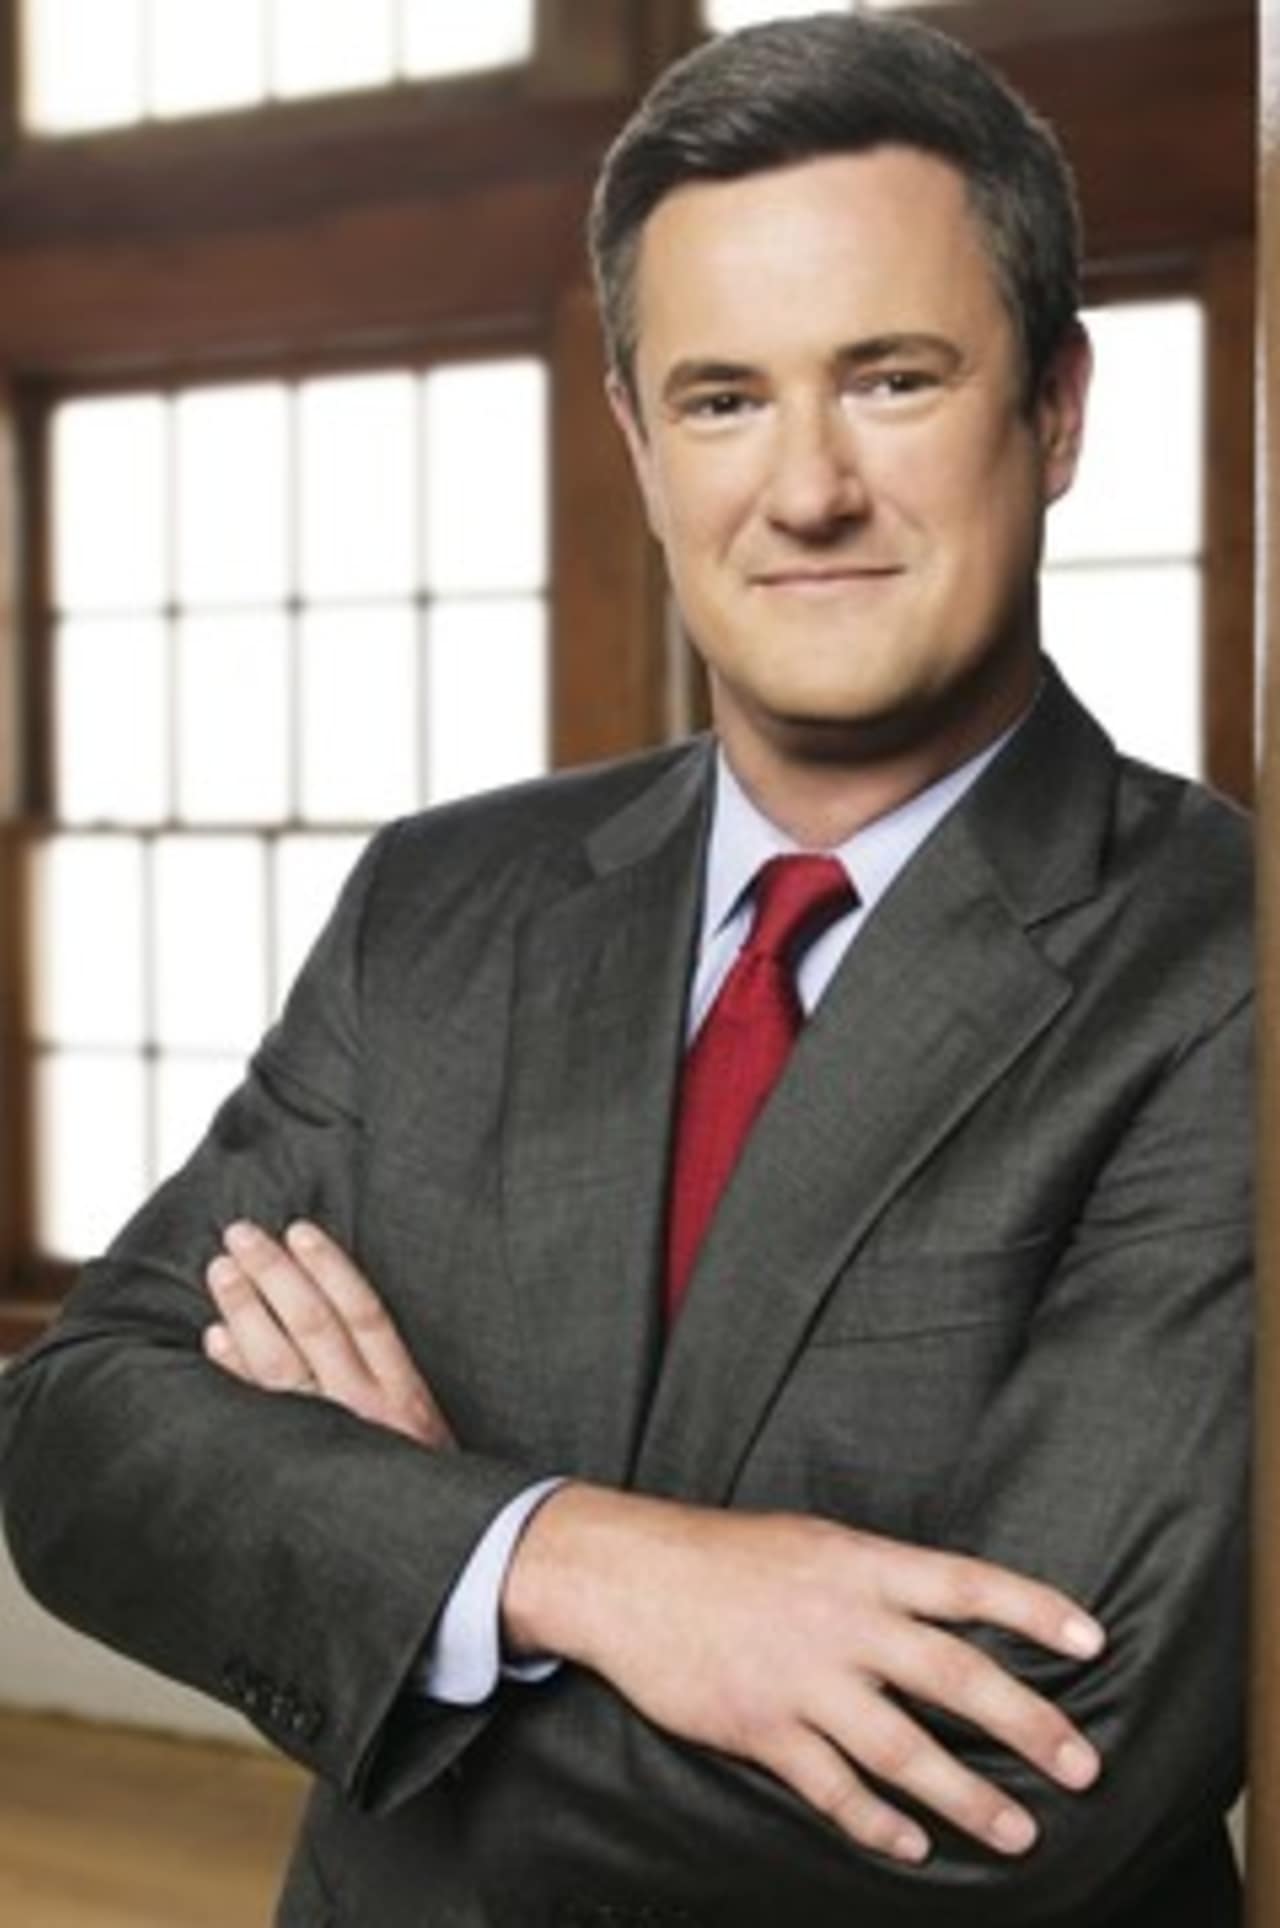 New Canaan resident Joe Scarborough recently divorced.